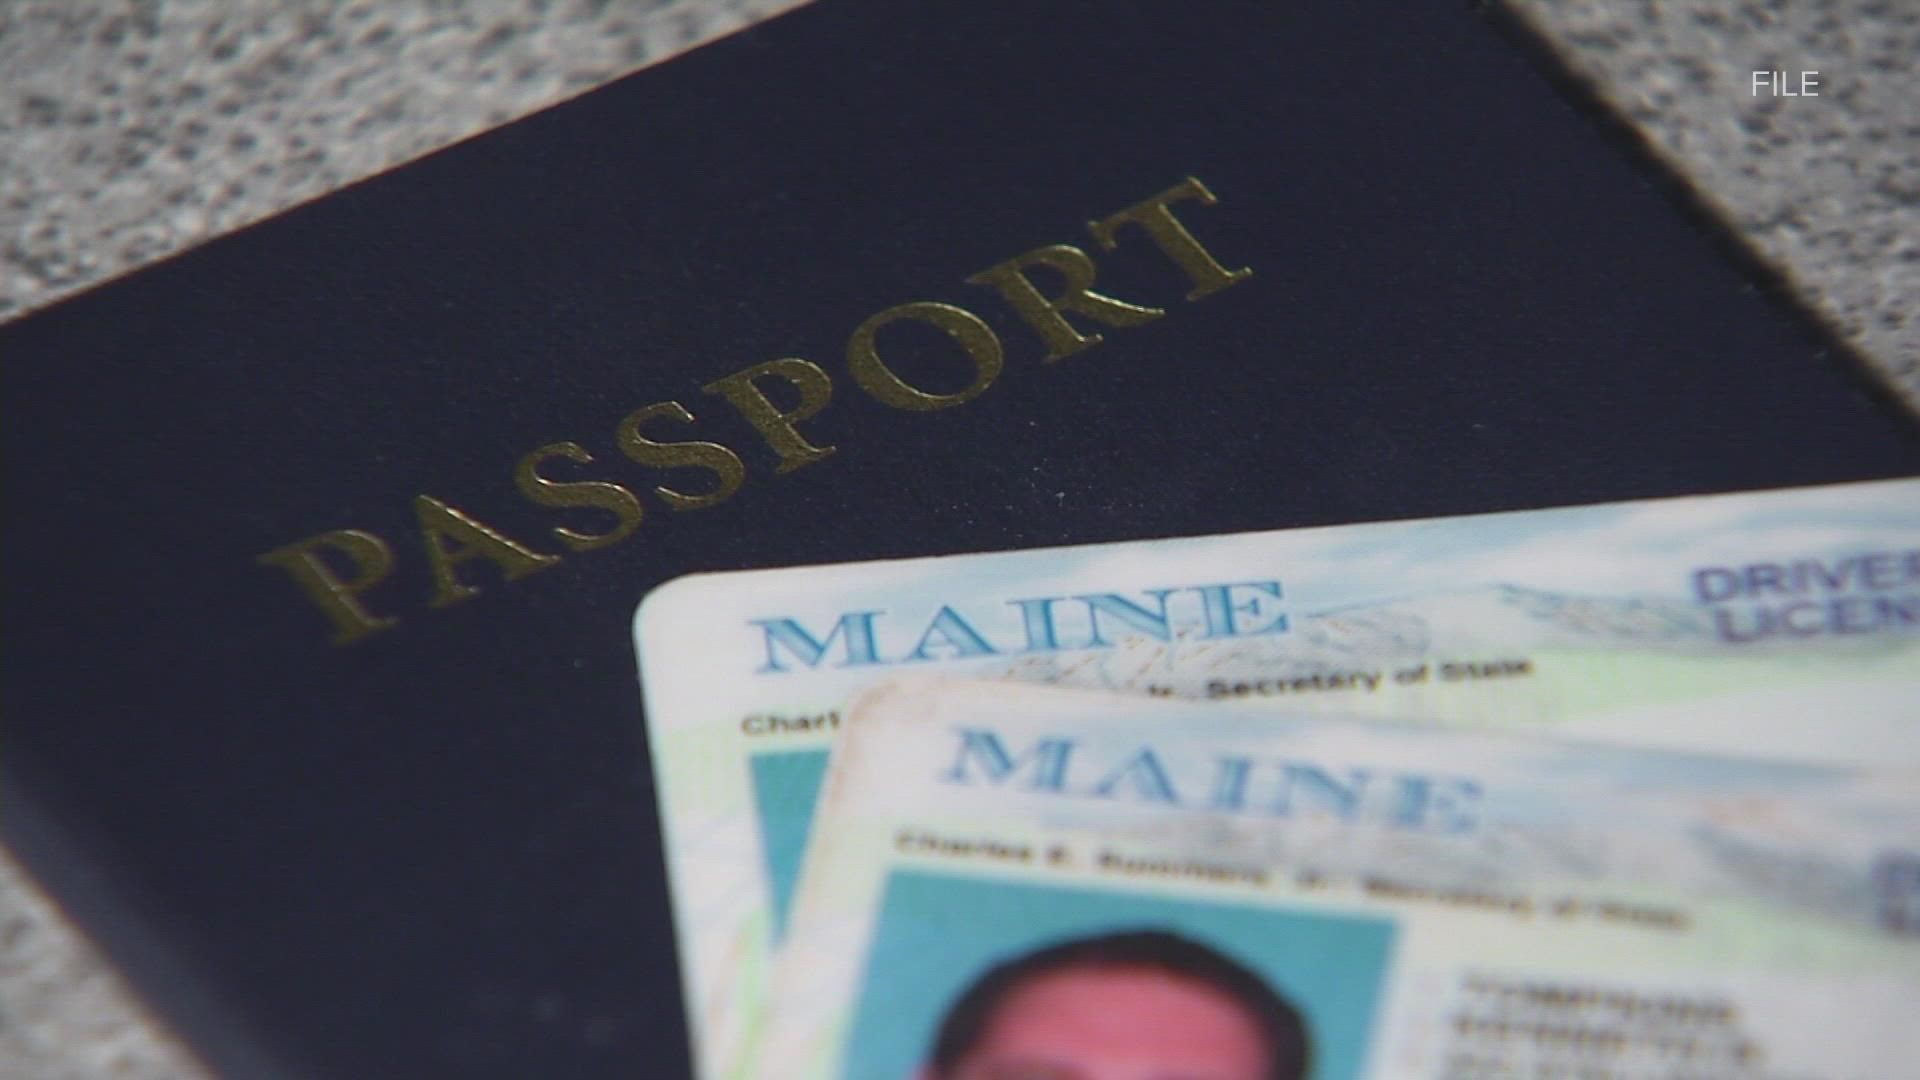 Following the announcement from Department of Homeland Security about the delay, the ACLU of Maine is calling for the law to be repealed altogether.